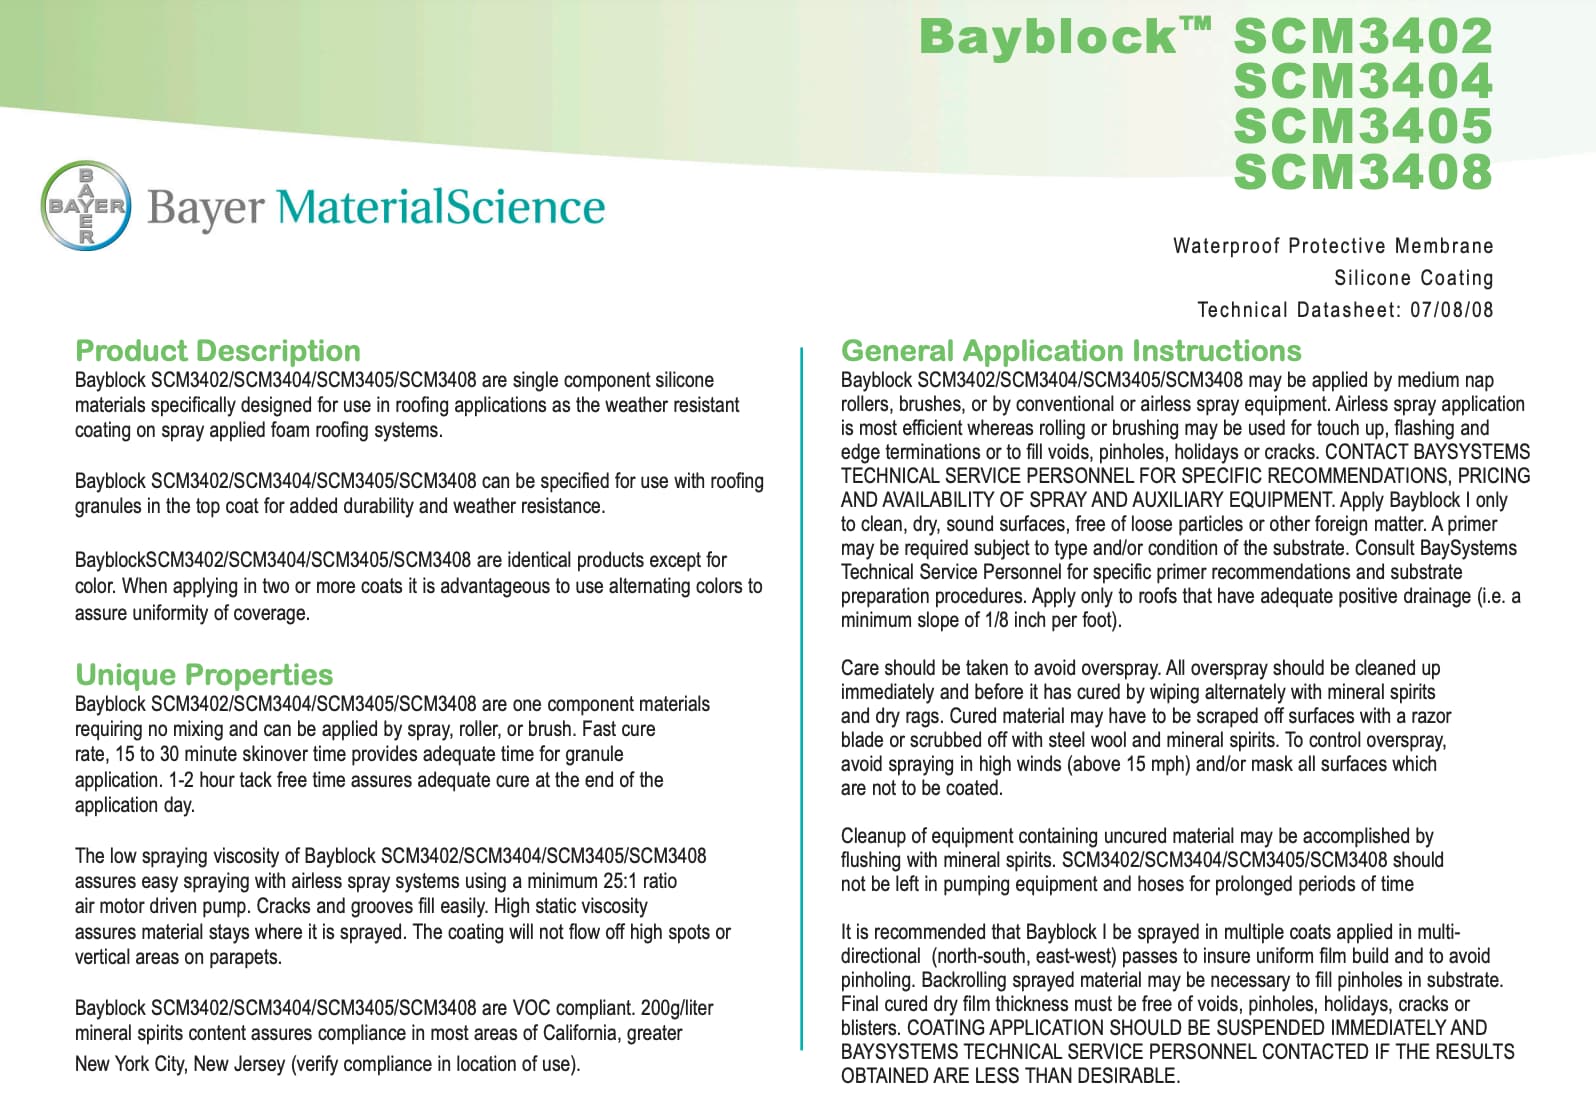 Bayblock scm 3402-3408 technical information cover photo